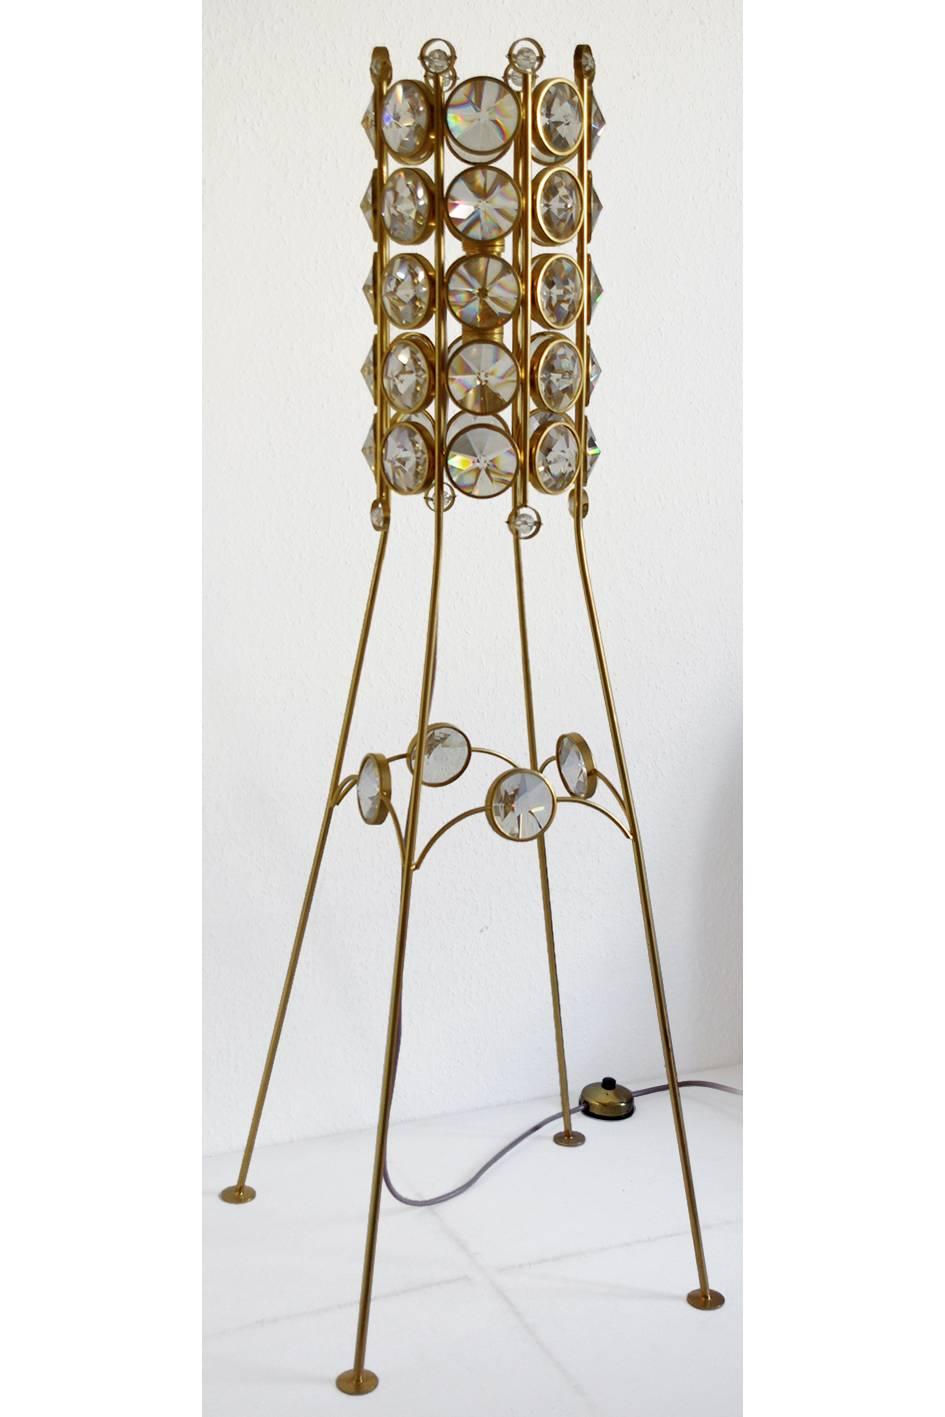 Unique German Vintage Crystal Glass and Brass Floor Lamp, 1950s In Good Condition For Sale In Berlin, DE